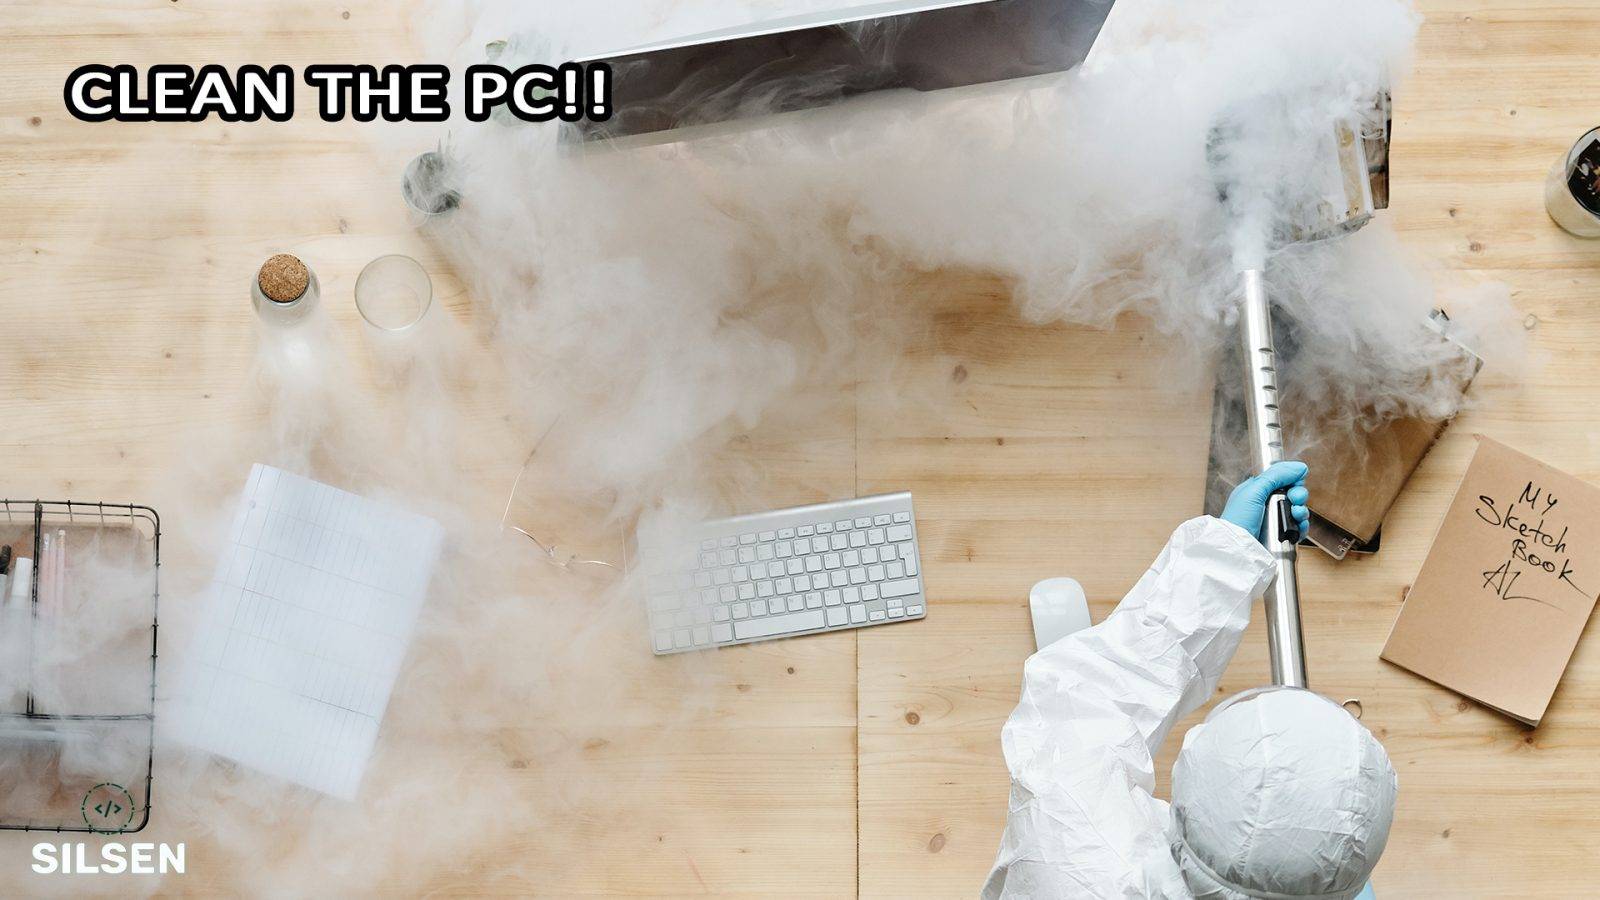 How do you clean your PC